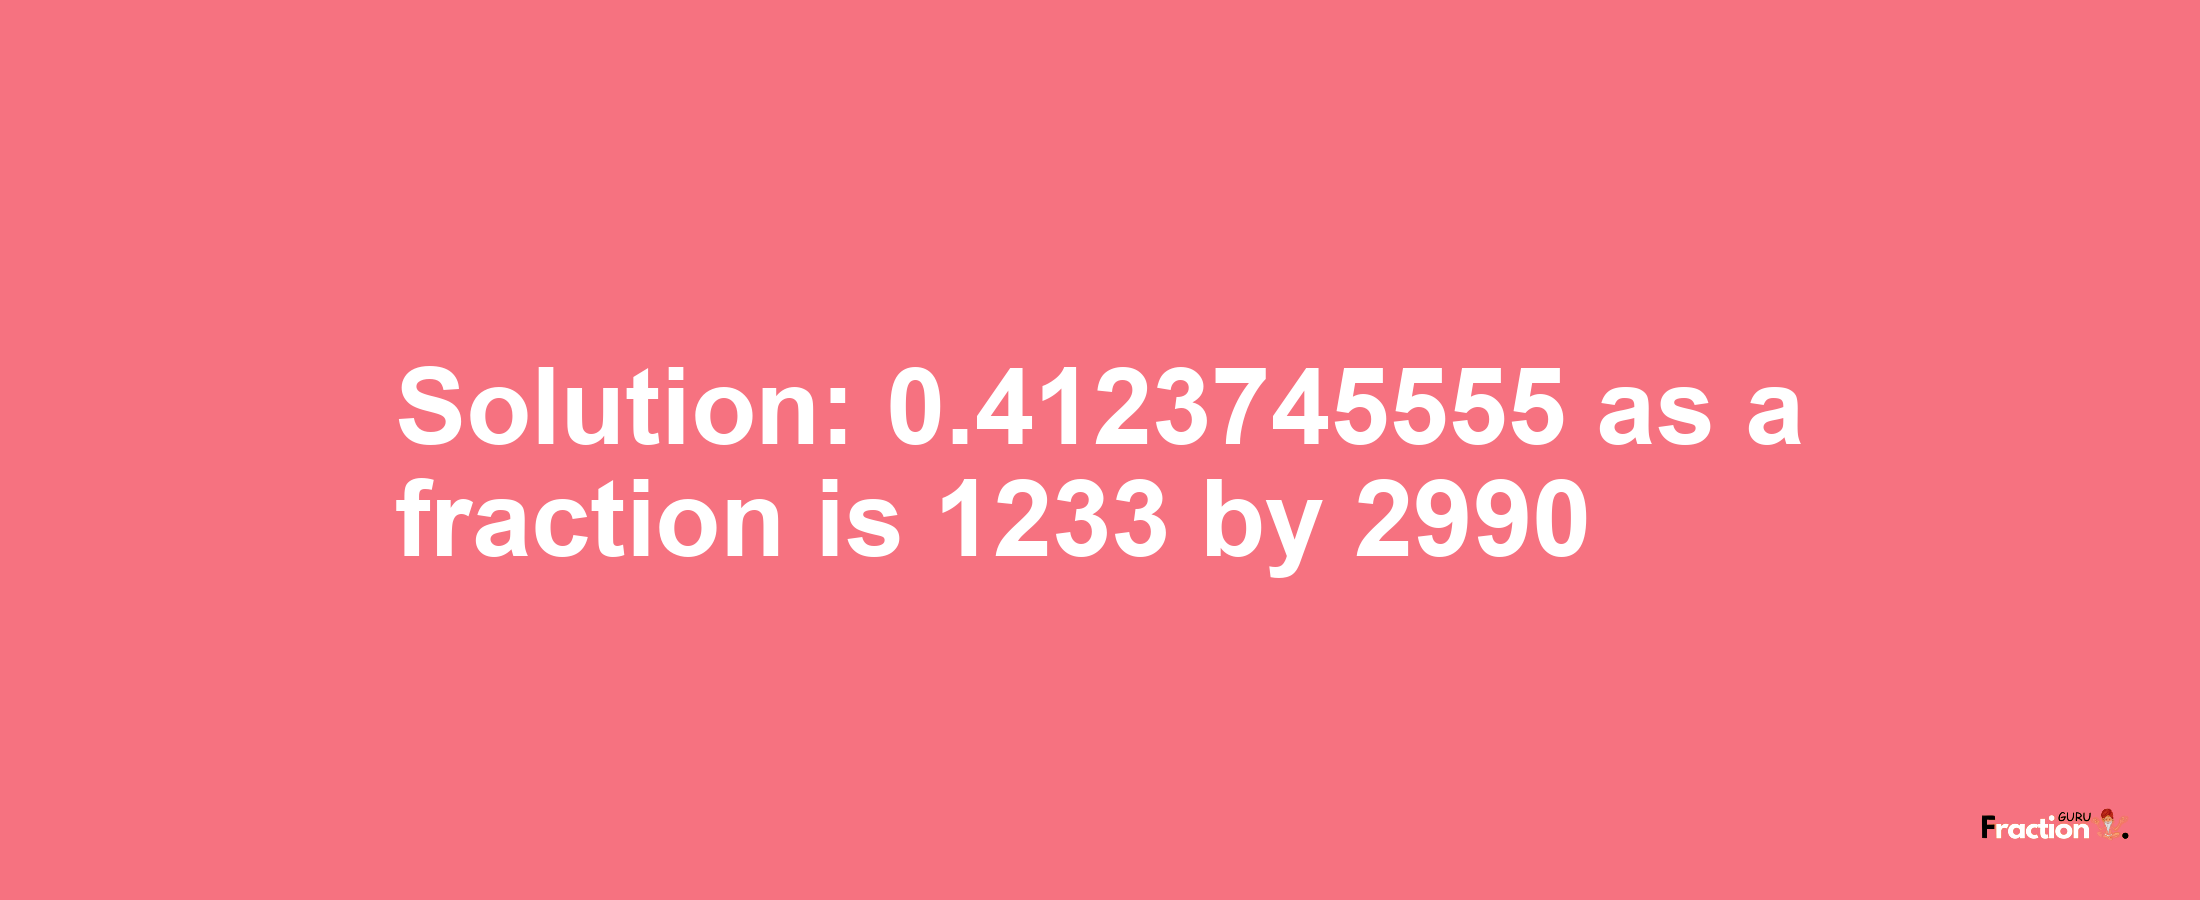 Solution:0.4123745555 as a fraction is 1233/2990